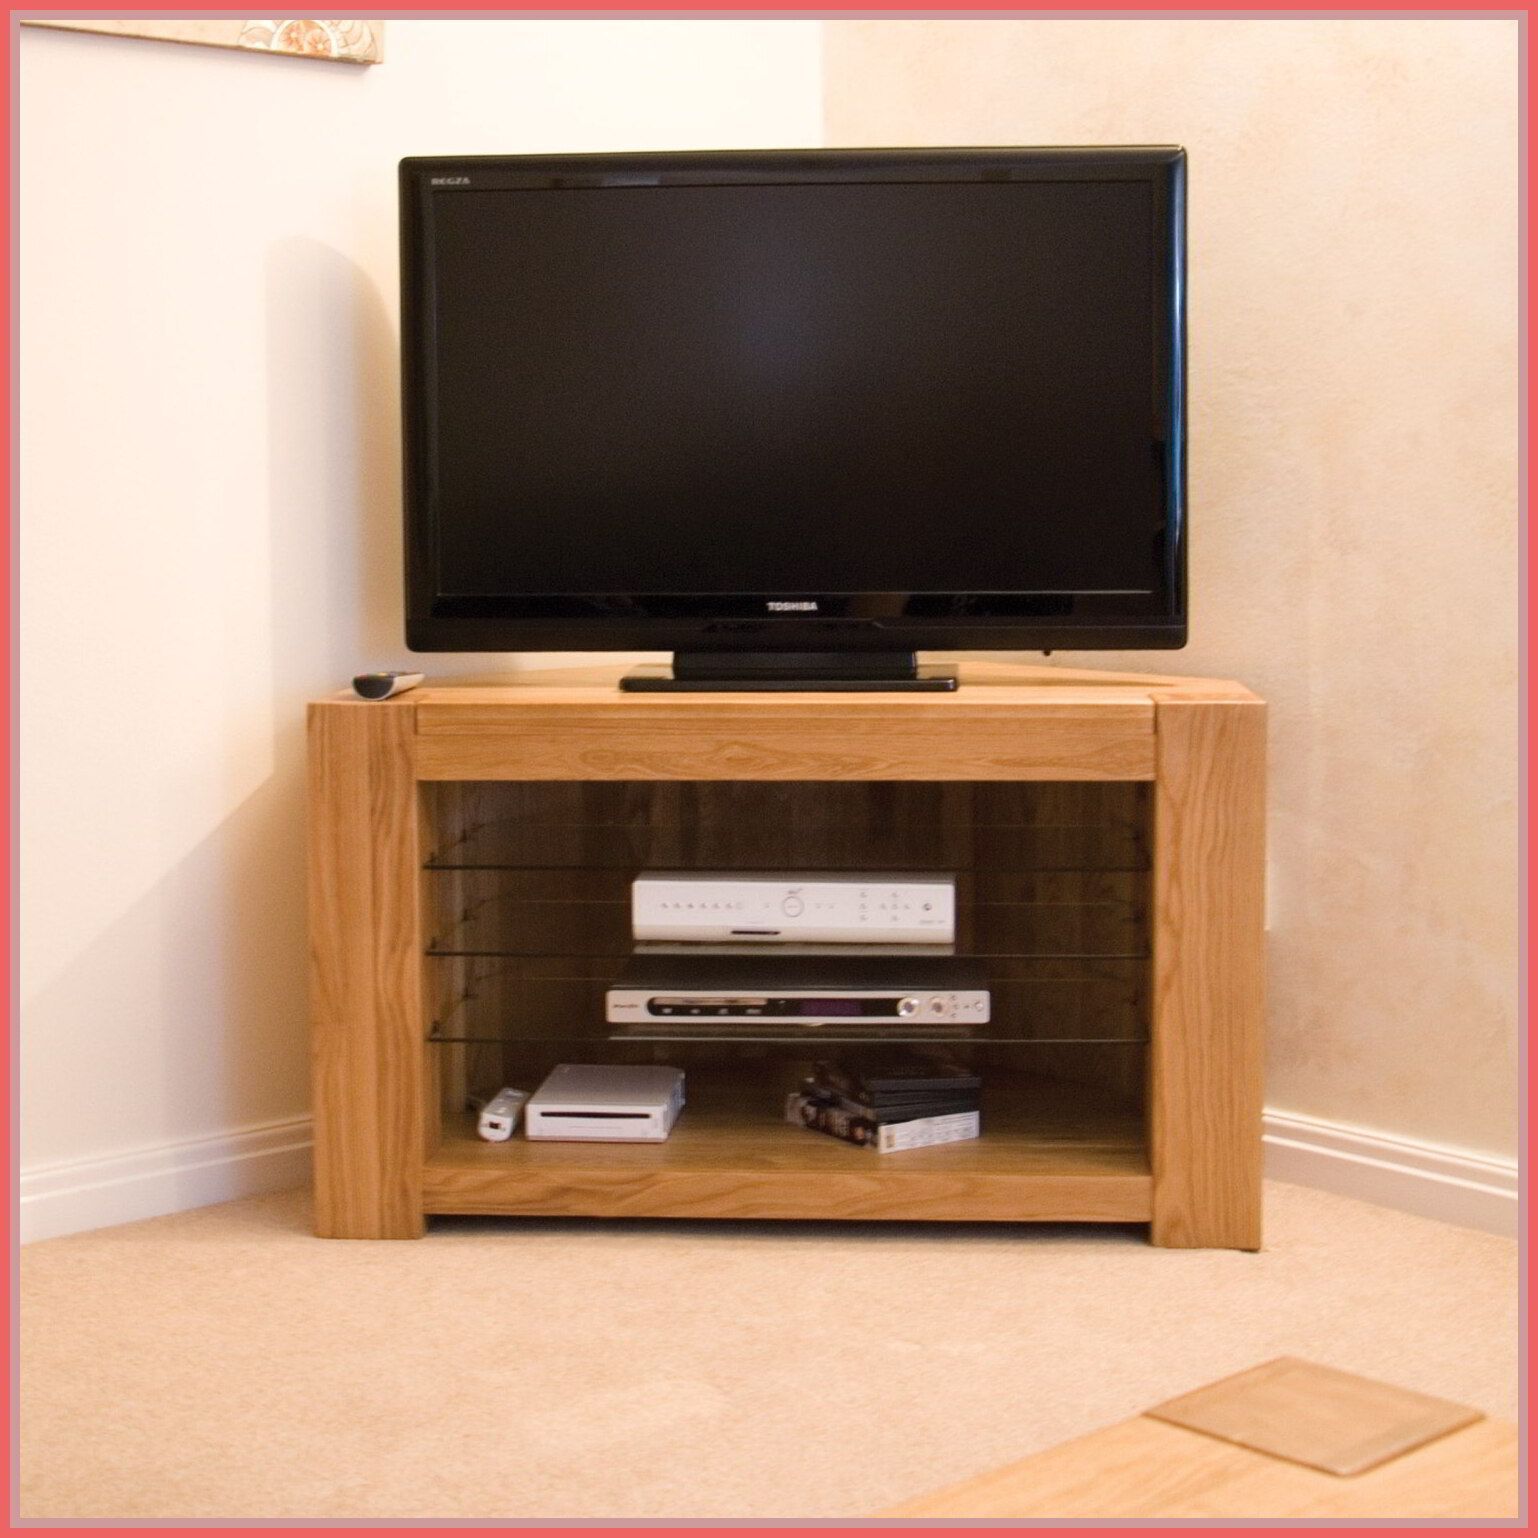 87 Reference Of Tv Stand Gold Oak In 2020 | Oak Tv Stand Intended For Gold Tv Stands (View 7 of 15)